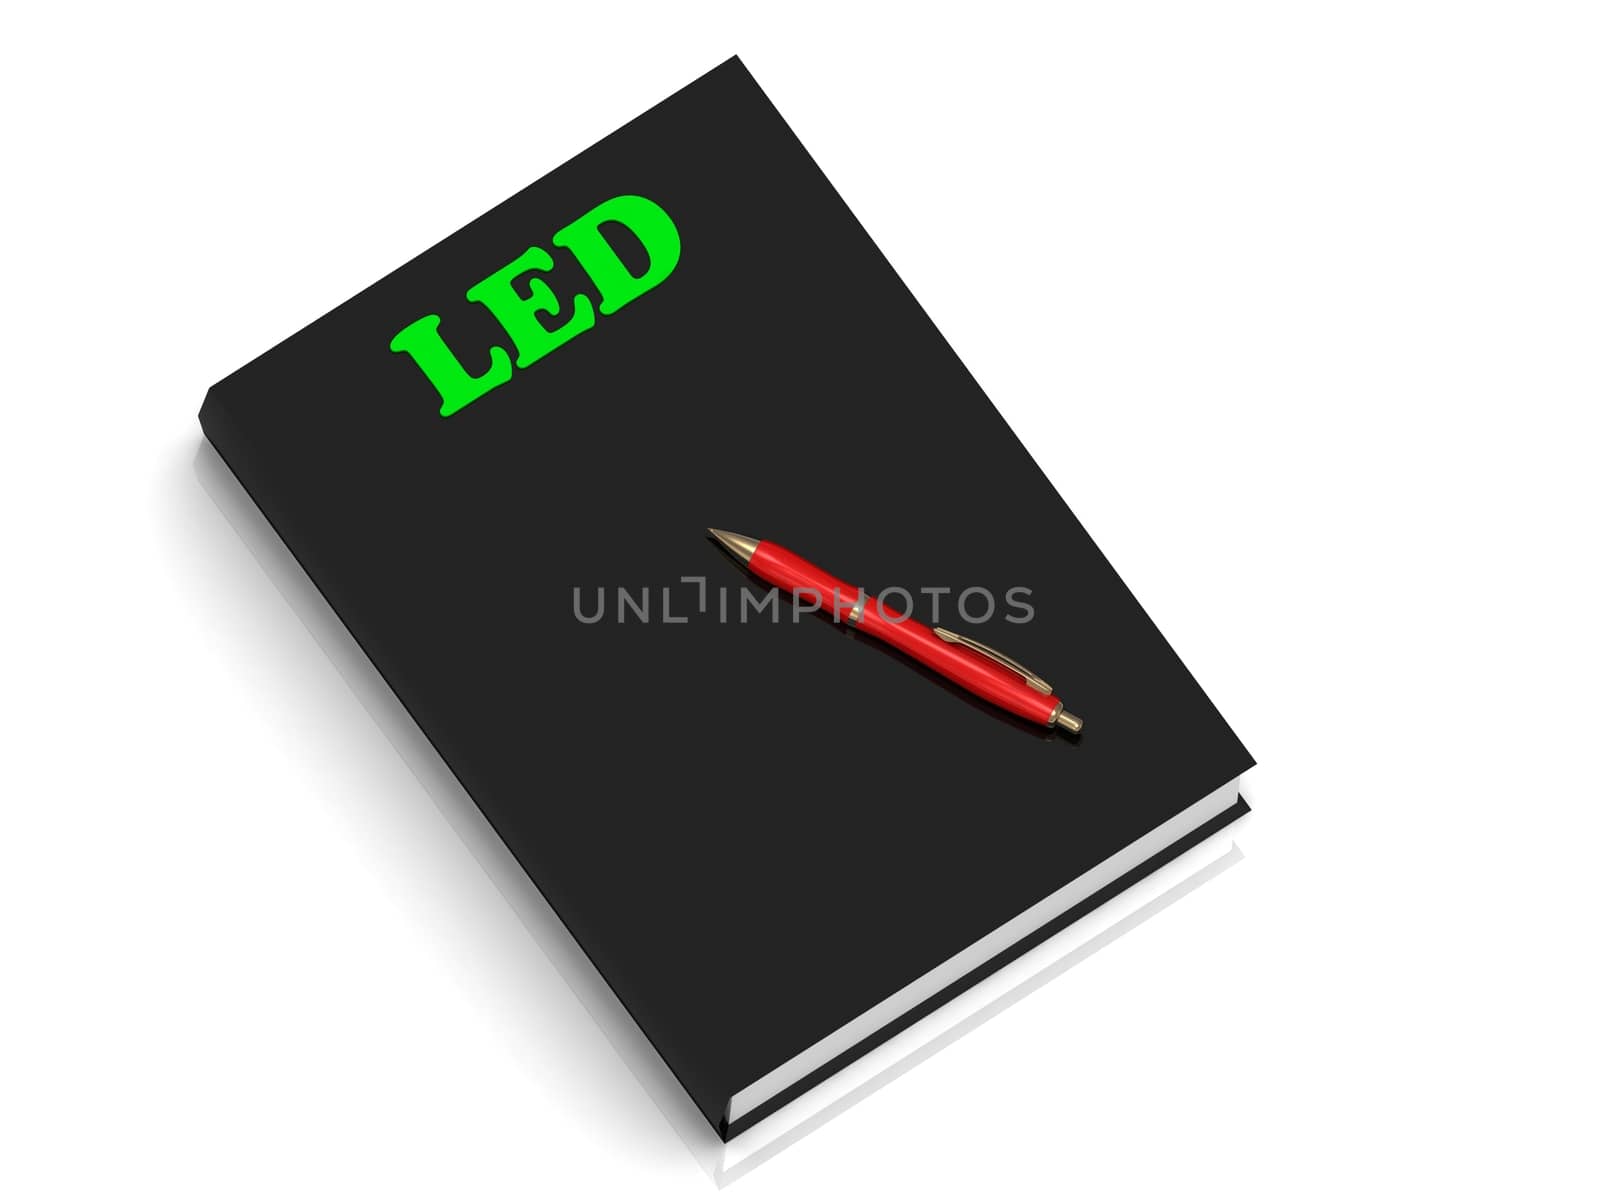 LED- inscription of green letters on black book on white background